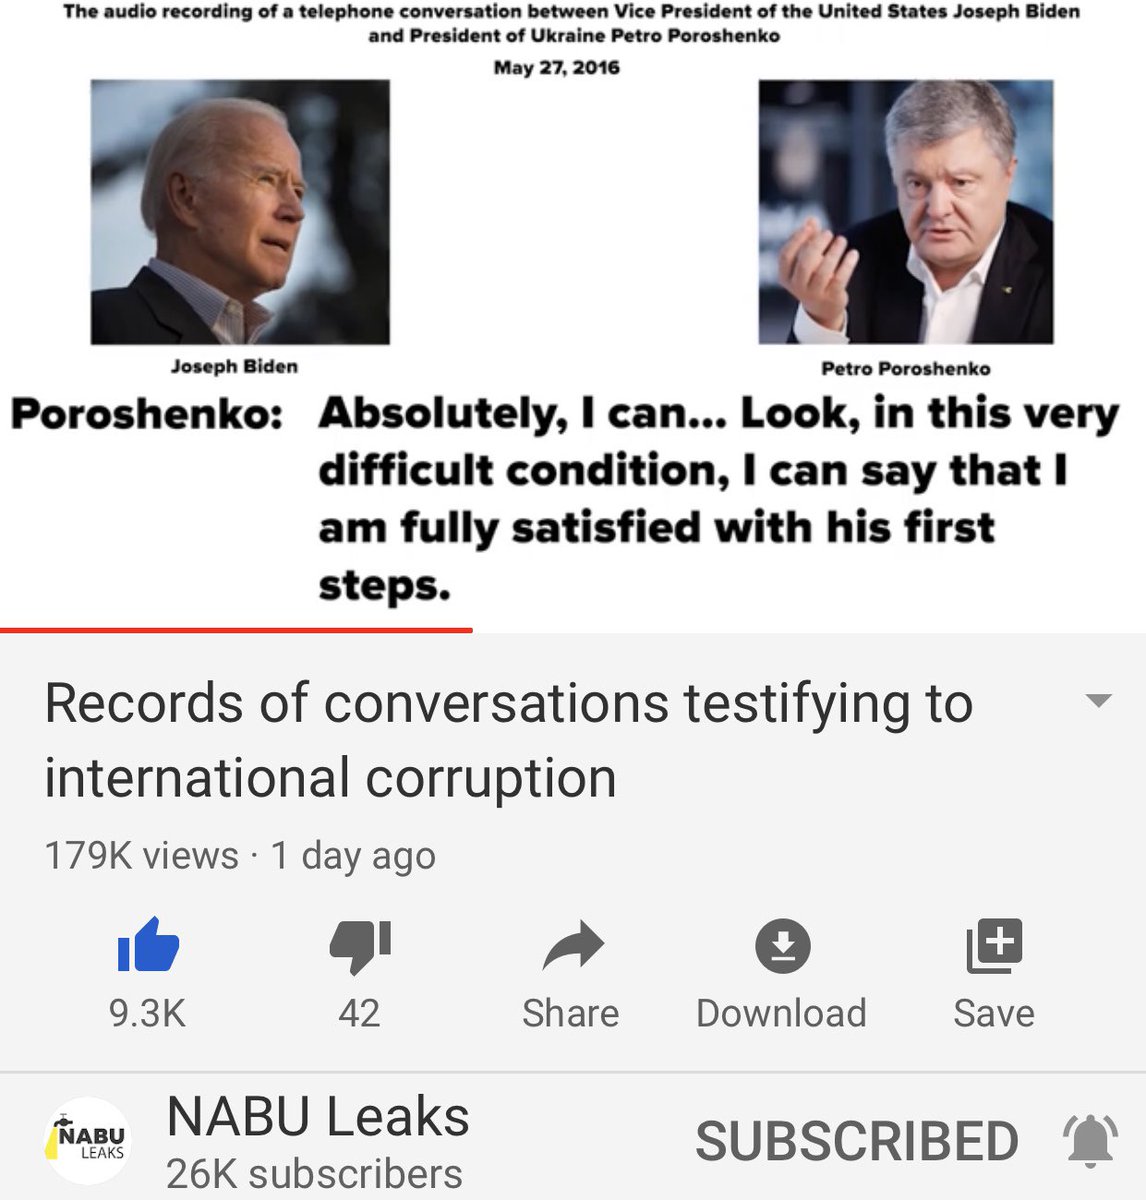 More on the Ukrainian American prosecutor from the May 2016 call between Biden and Poroshenko and it’s very obvious what’s going on. It’s not Poroshenko who’s running Ukraine but again, it’s Biden who’s also enriching himself off the taxpayers